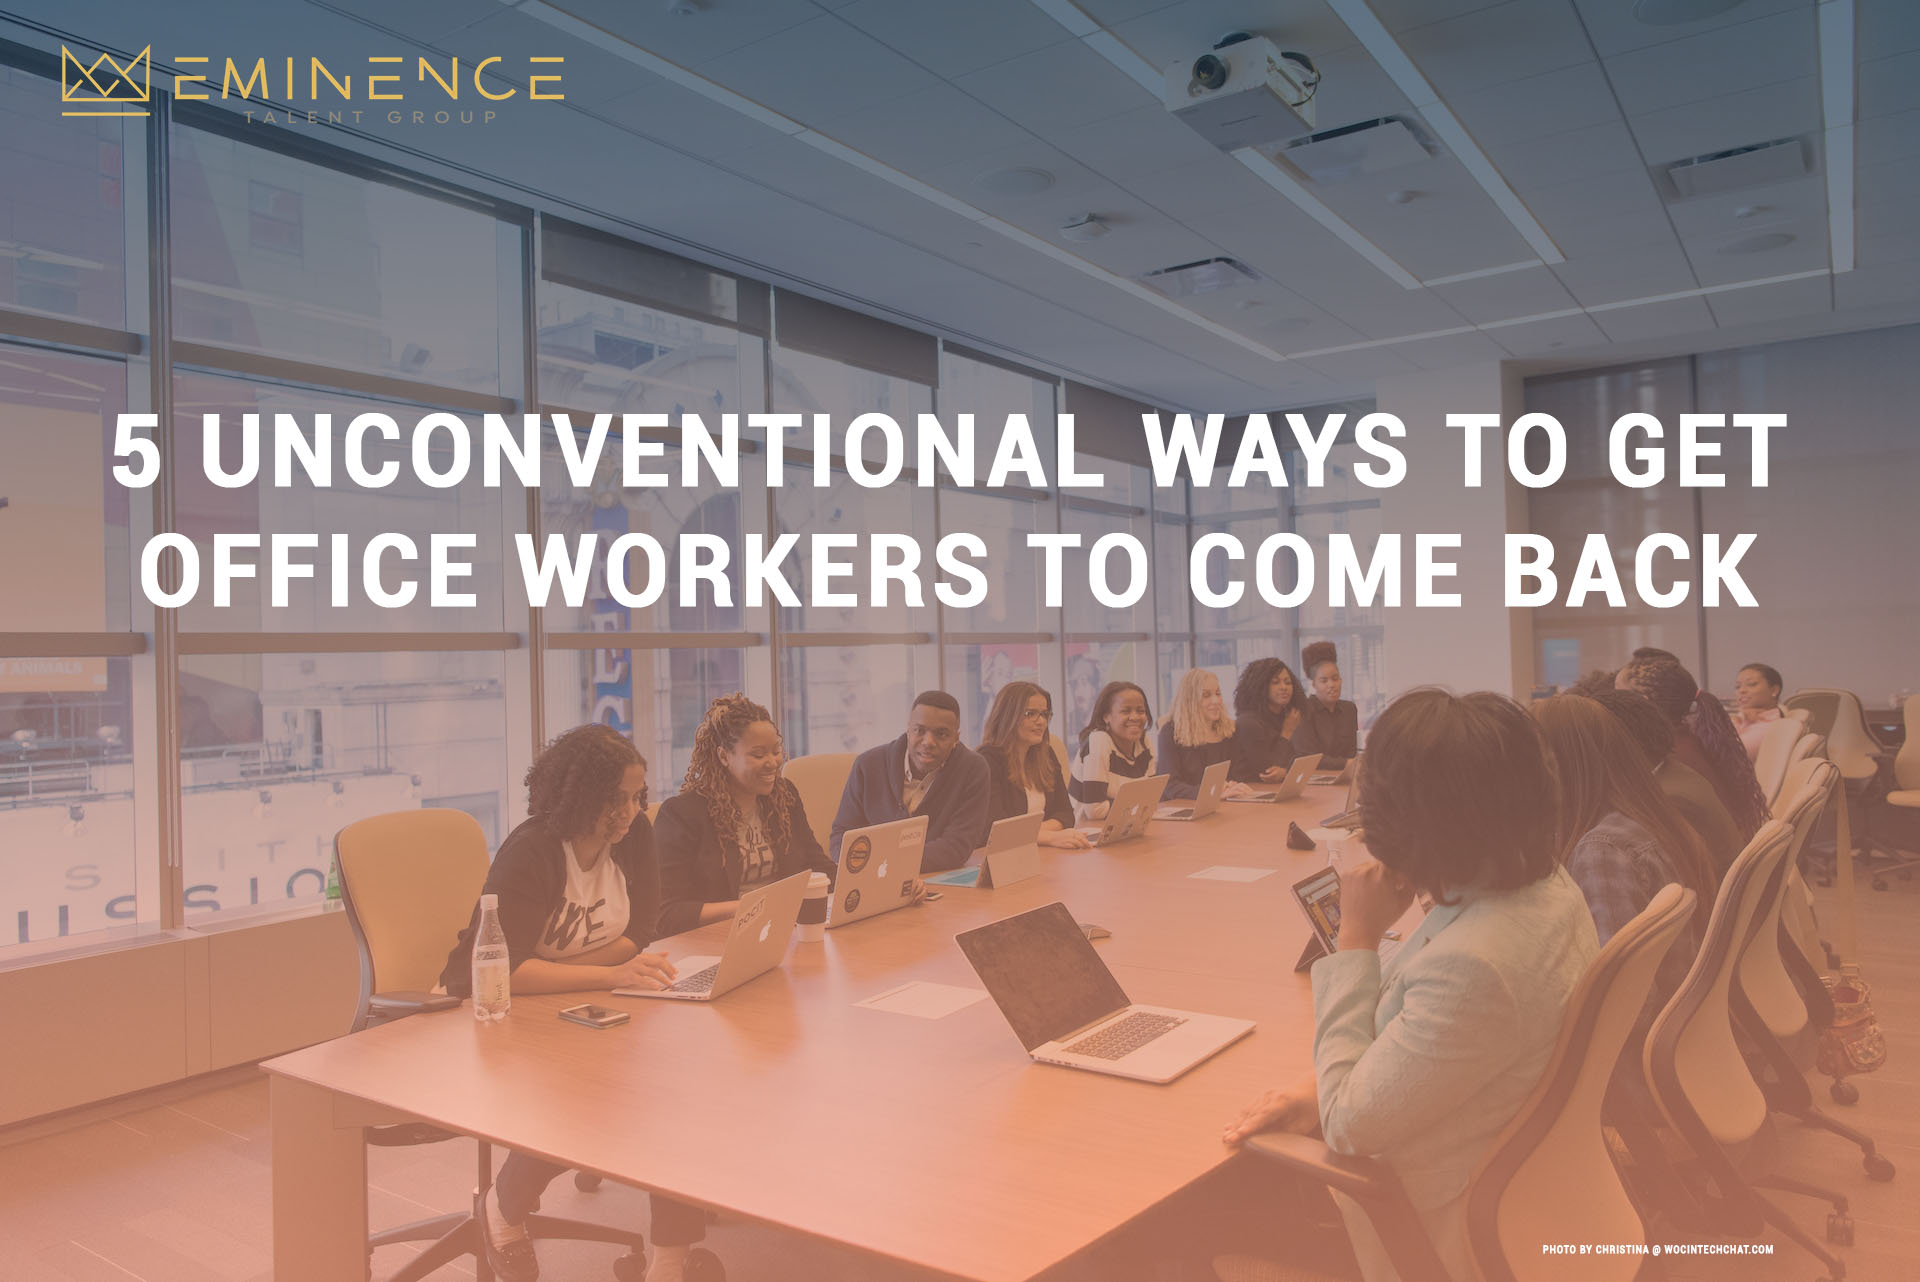 5 Unconventional Ways to Get Office Workers to Come Back